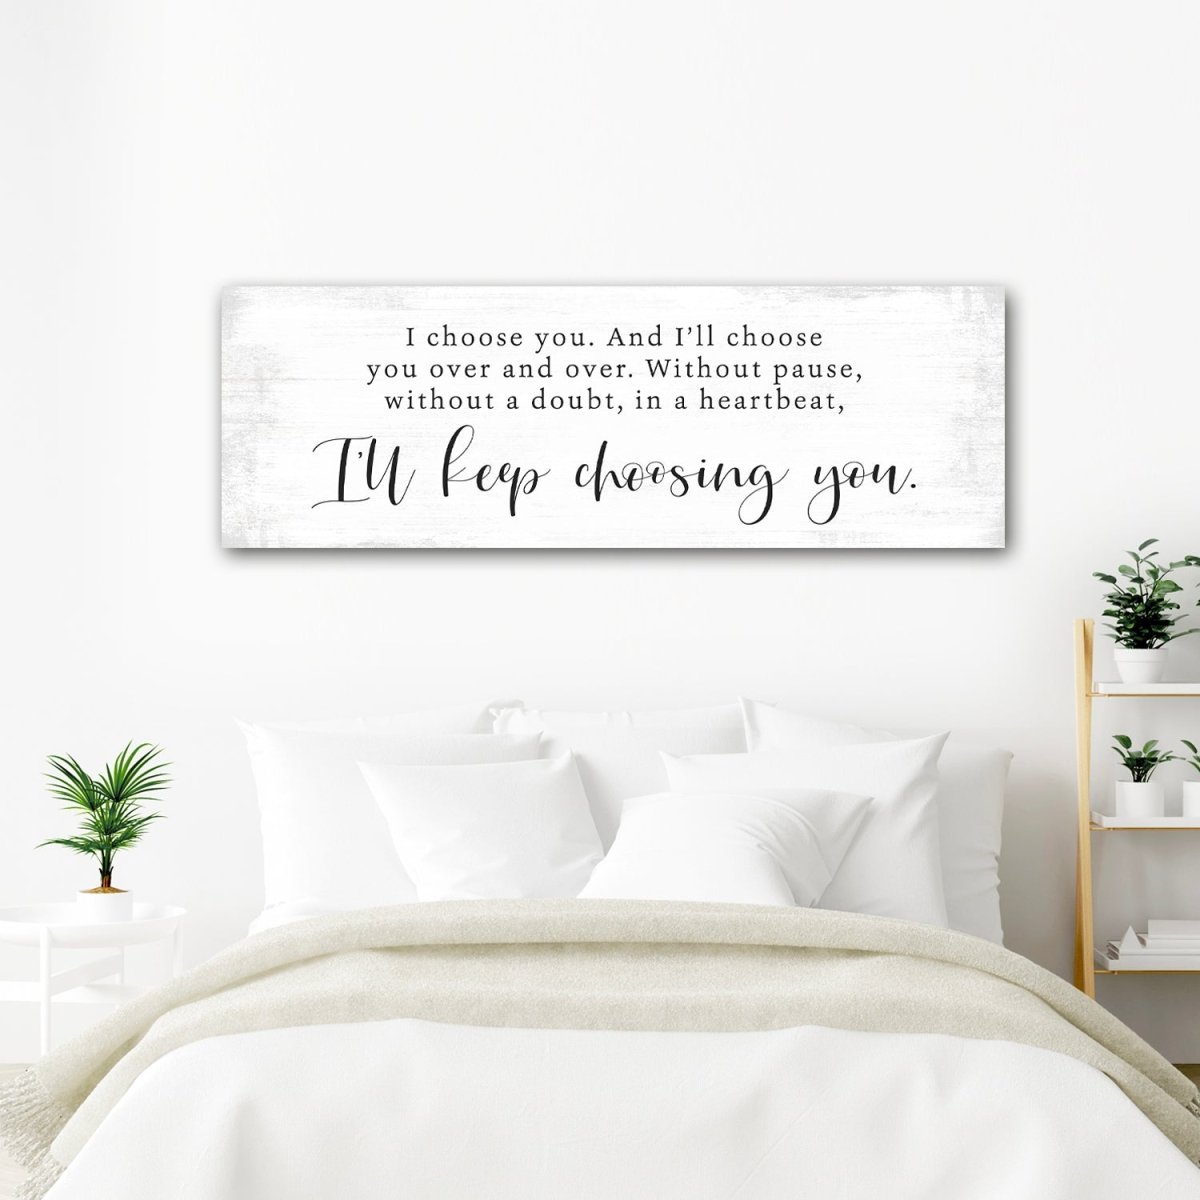 I Choose You Canvas Wall Art Hanging on Wall in Bedroom - Pretty Perfect Studio